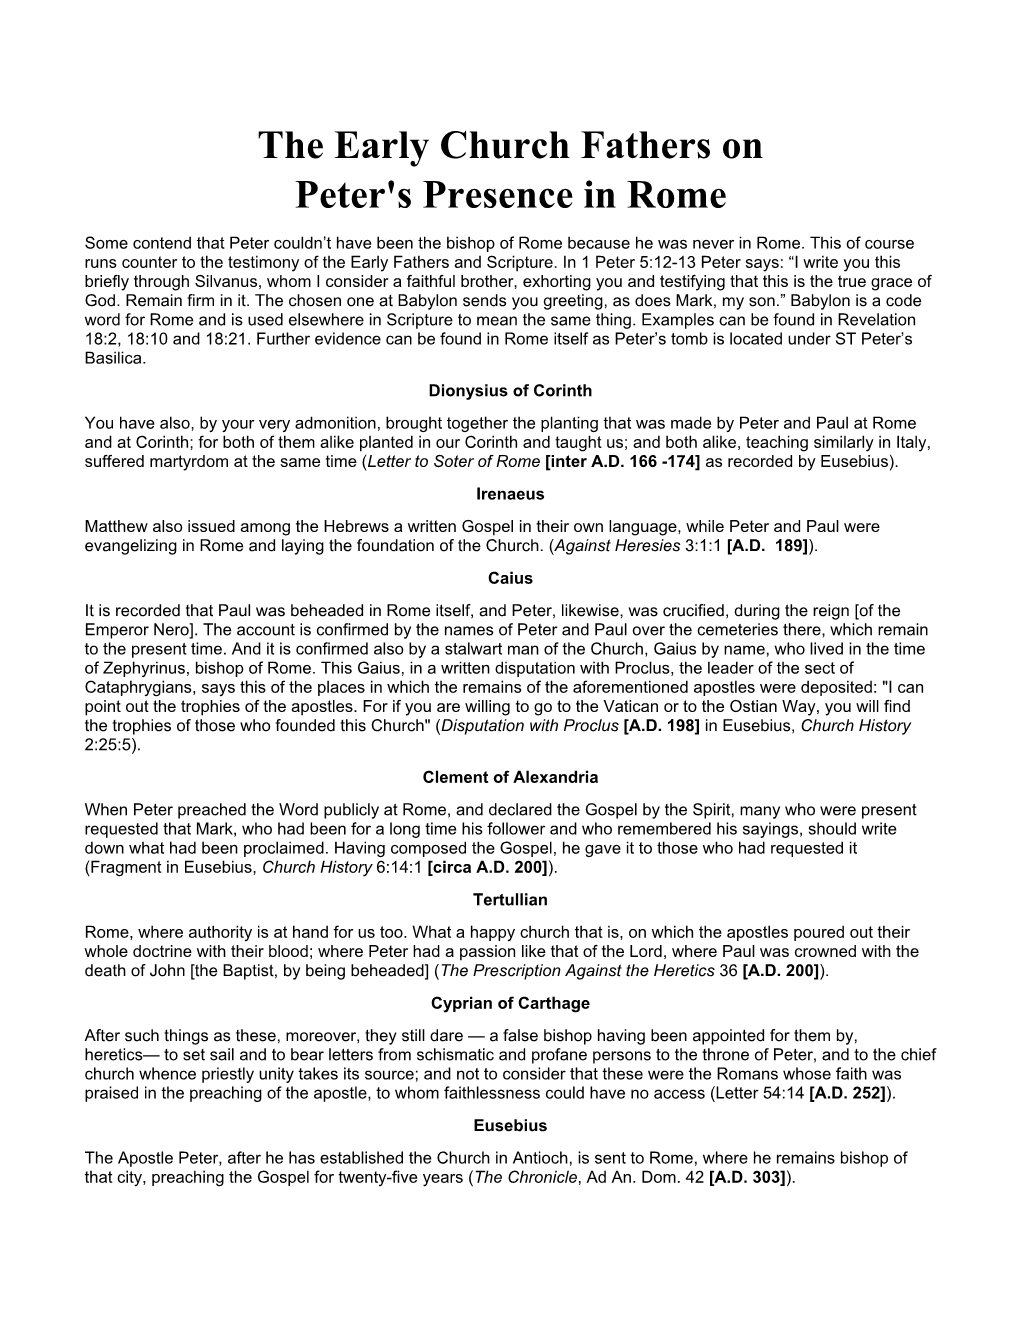 The Early Church Fathers on Peter's Presence in Rome